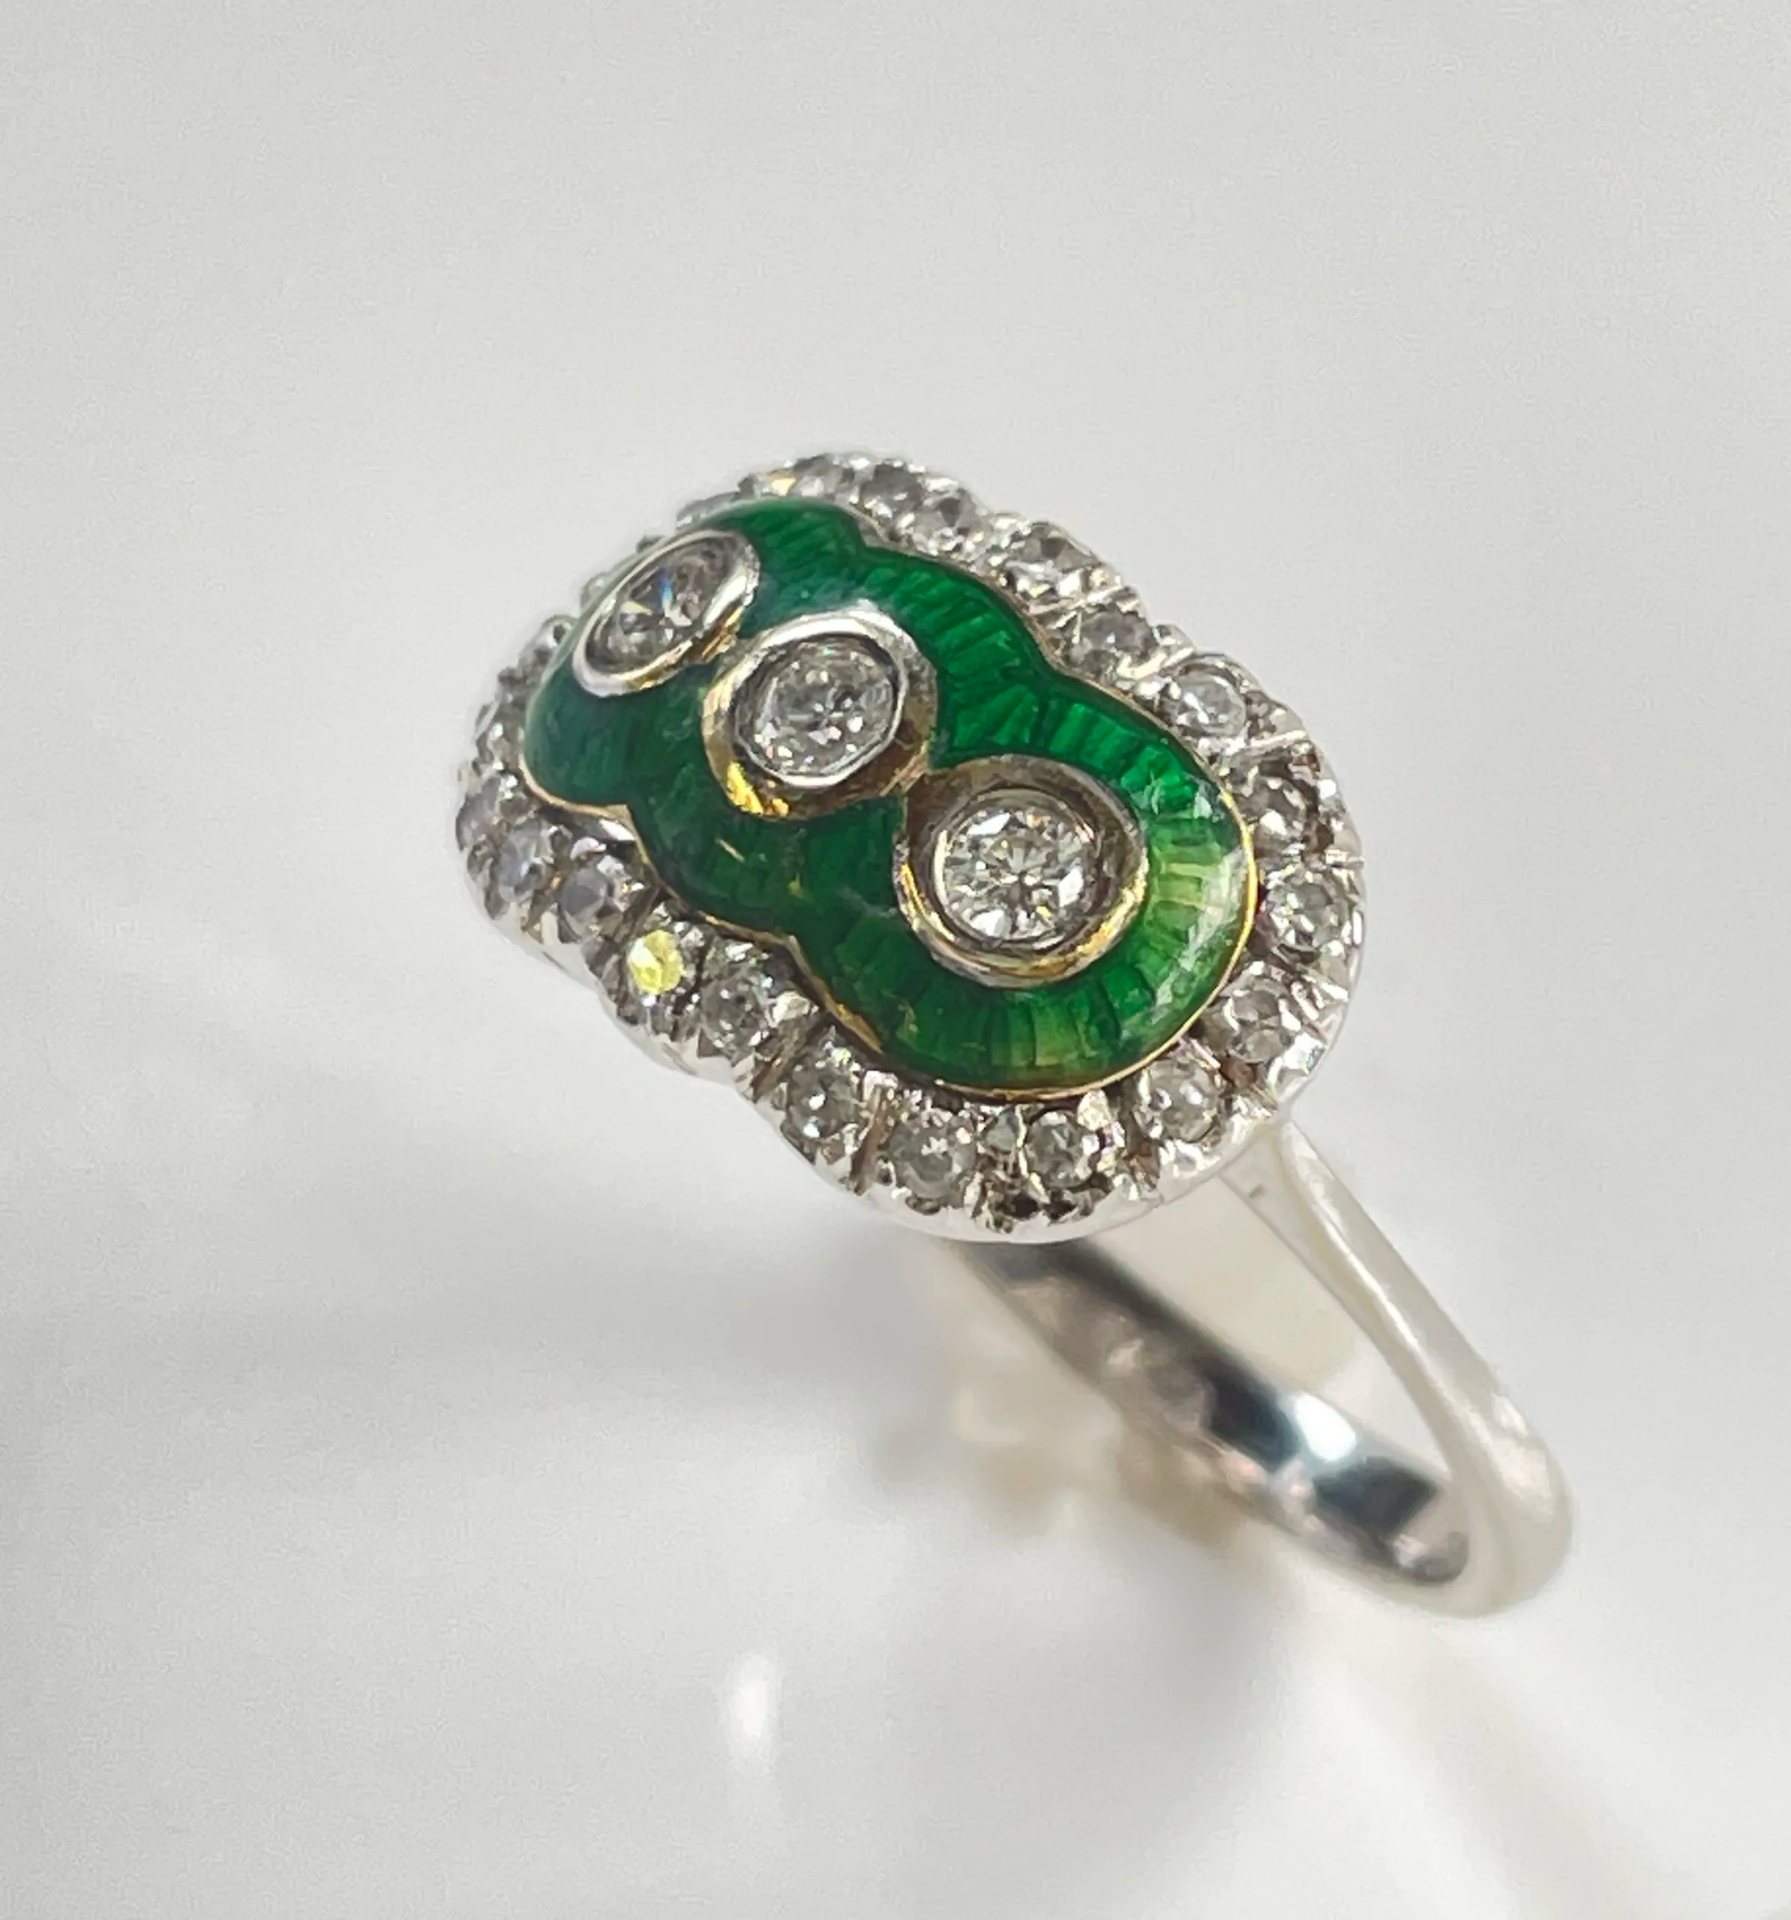 Antique Art Deco Ring 18K Gold with Diamonds and Enamel - Image 2 of 4